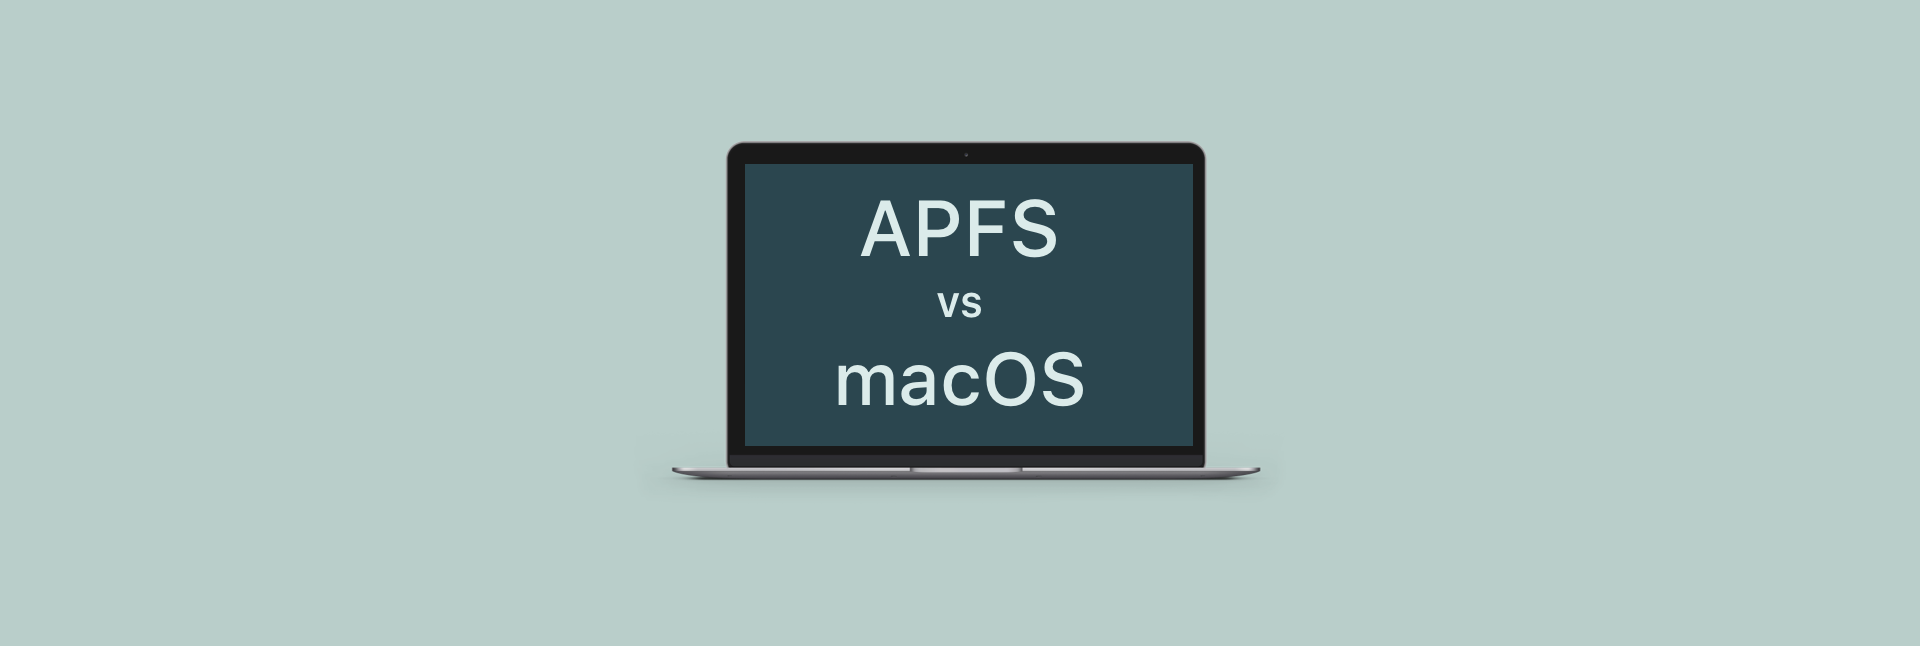 compatibility issue between apfs and macjournal extended